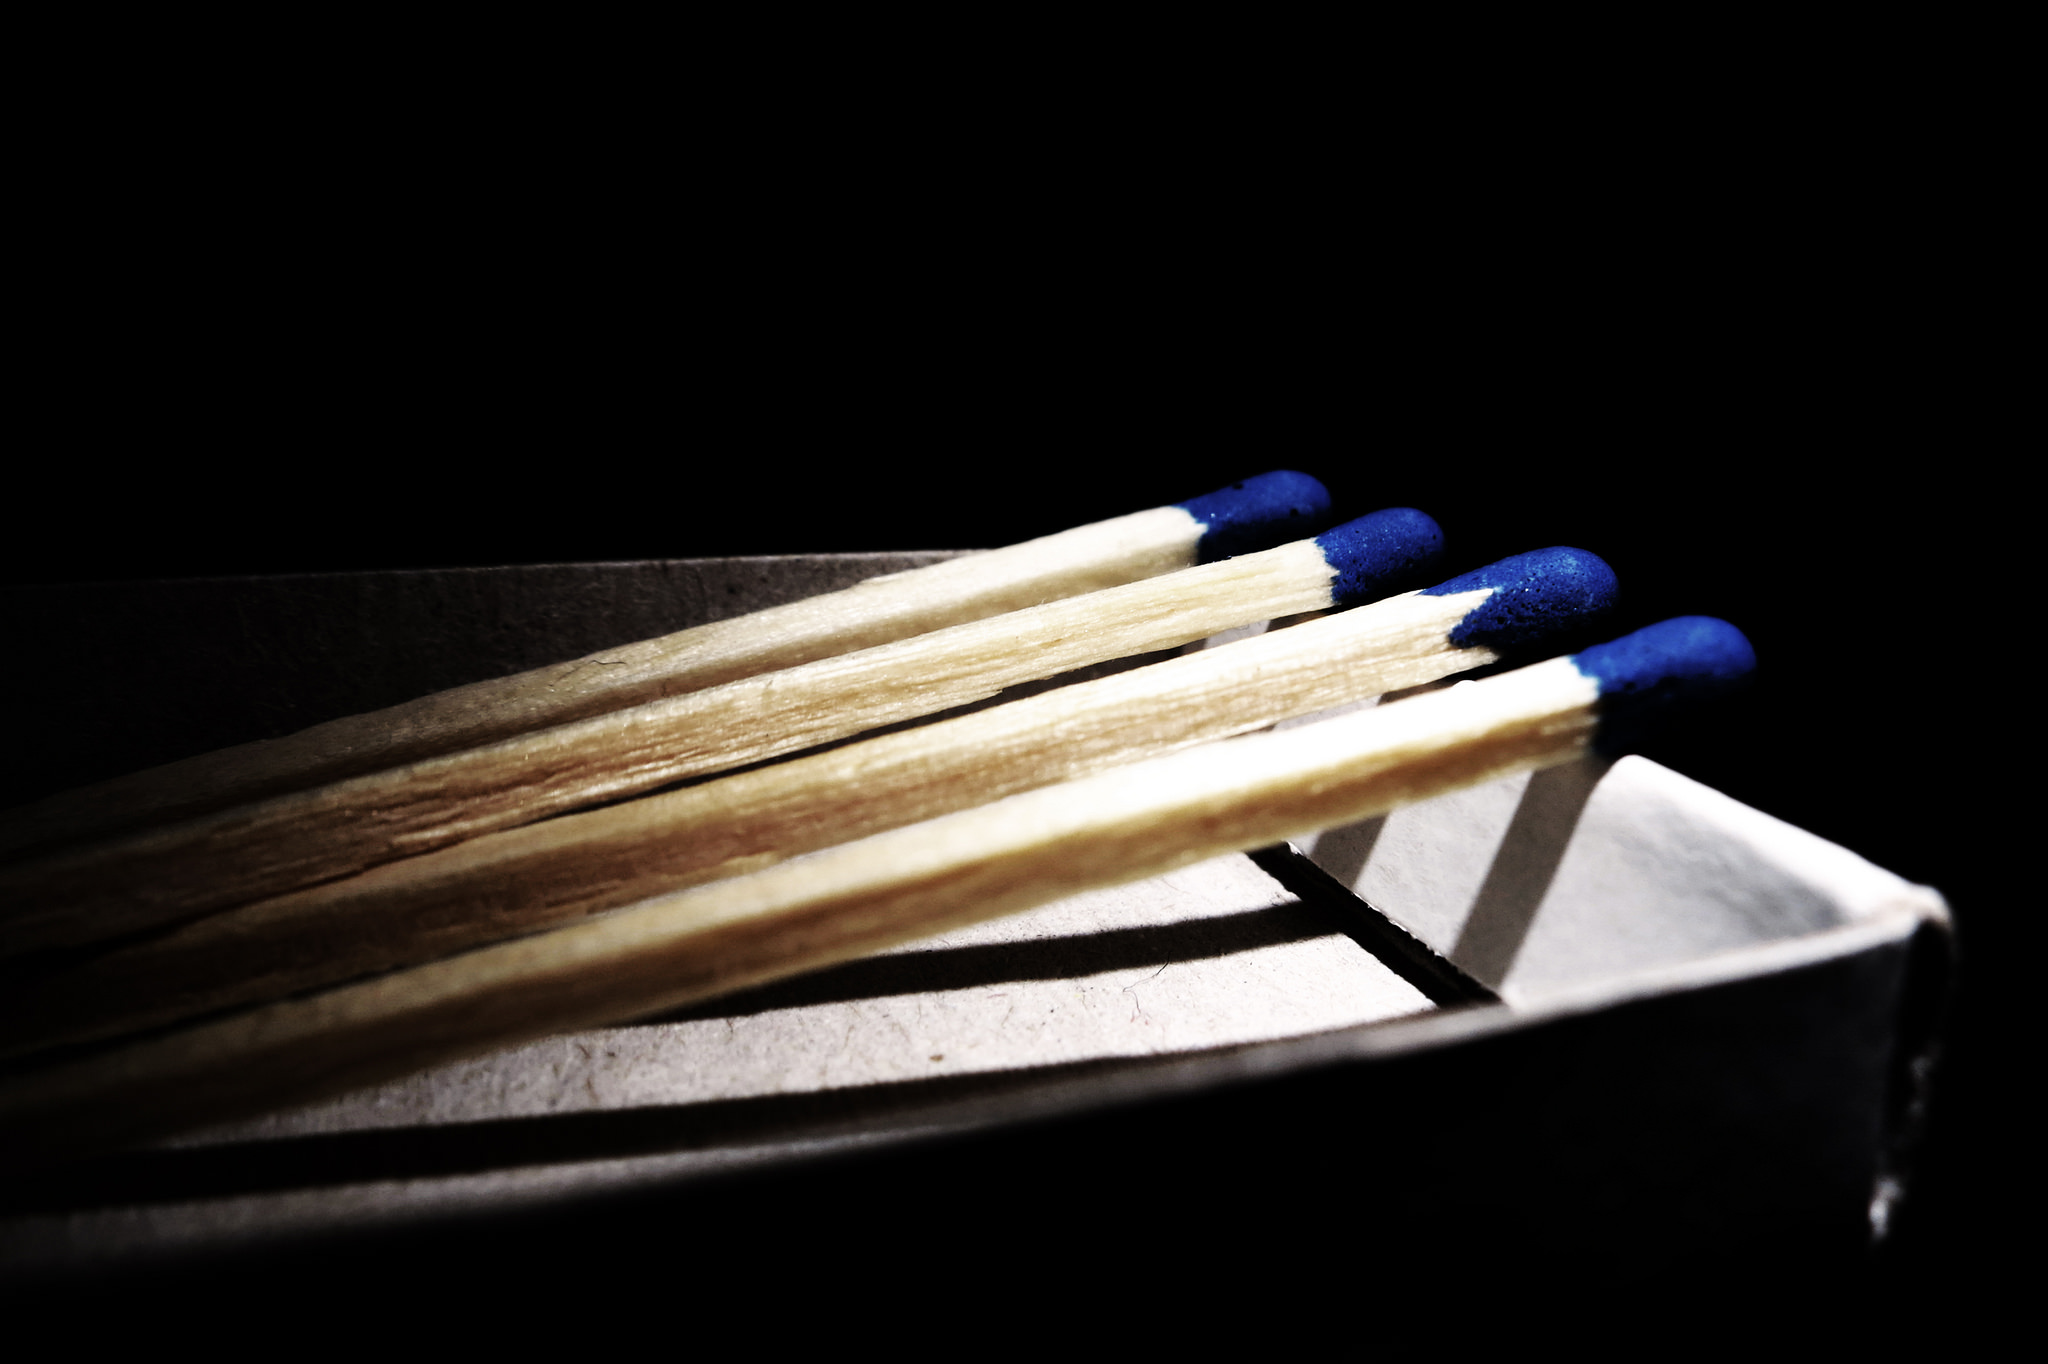 Four blue-tipped matches, resting on the edge of a box.